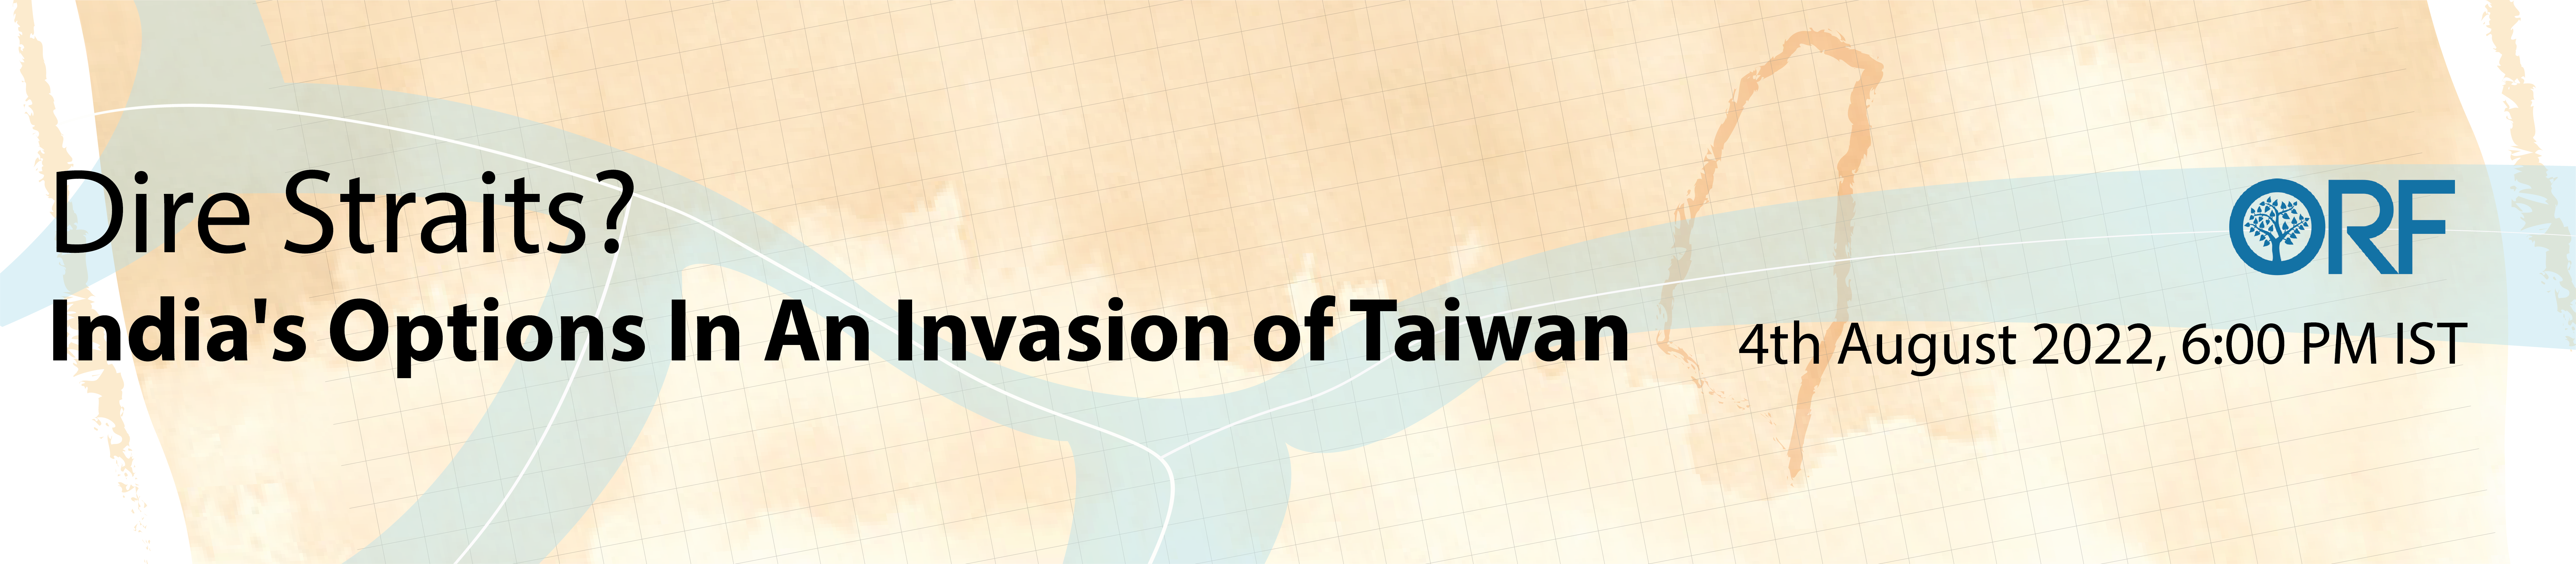 Dire Straits? India's Options In An Invasion of Taiwan